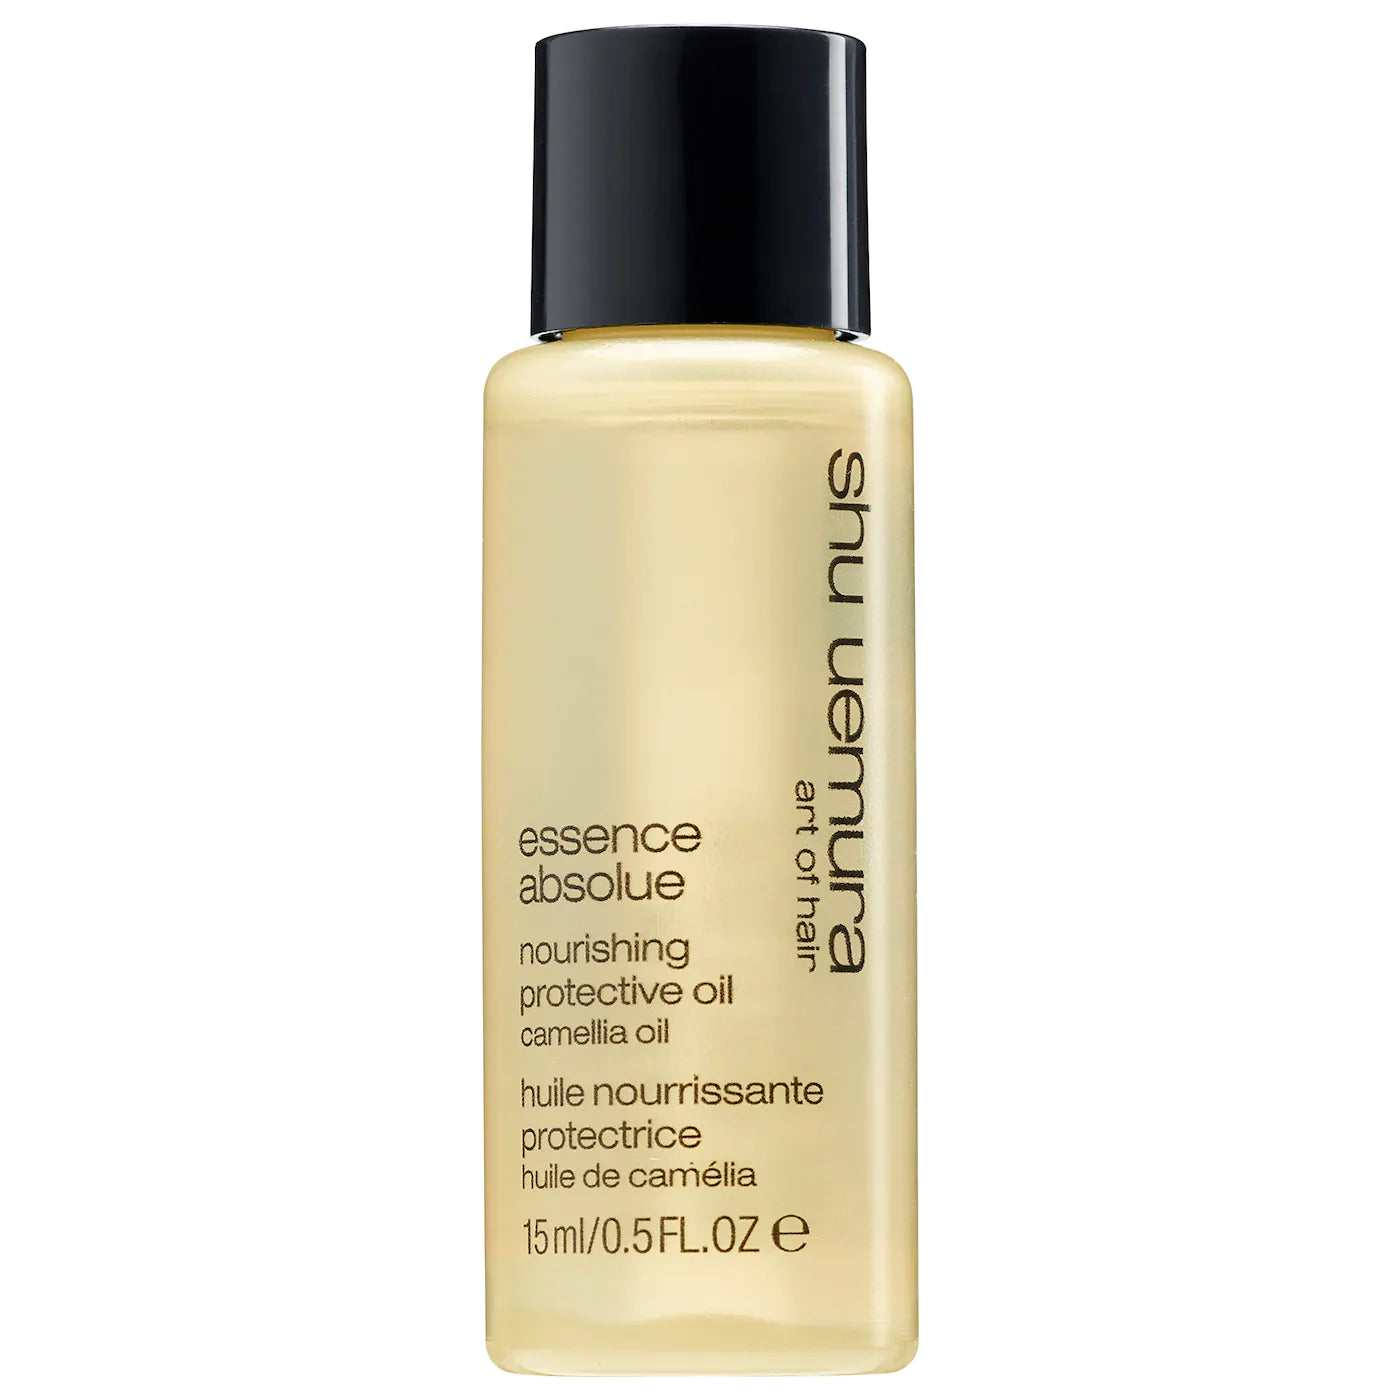 Essence Absolue Nourishing Protective Oil Trial Size - 15 ml